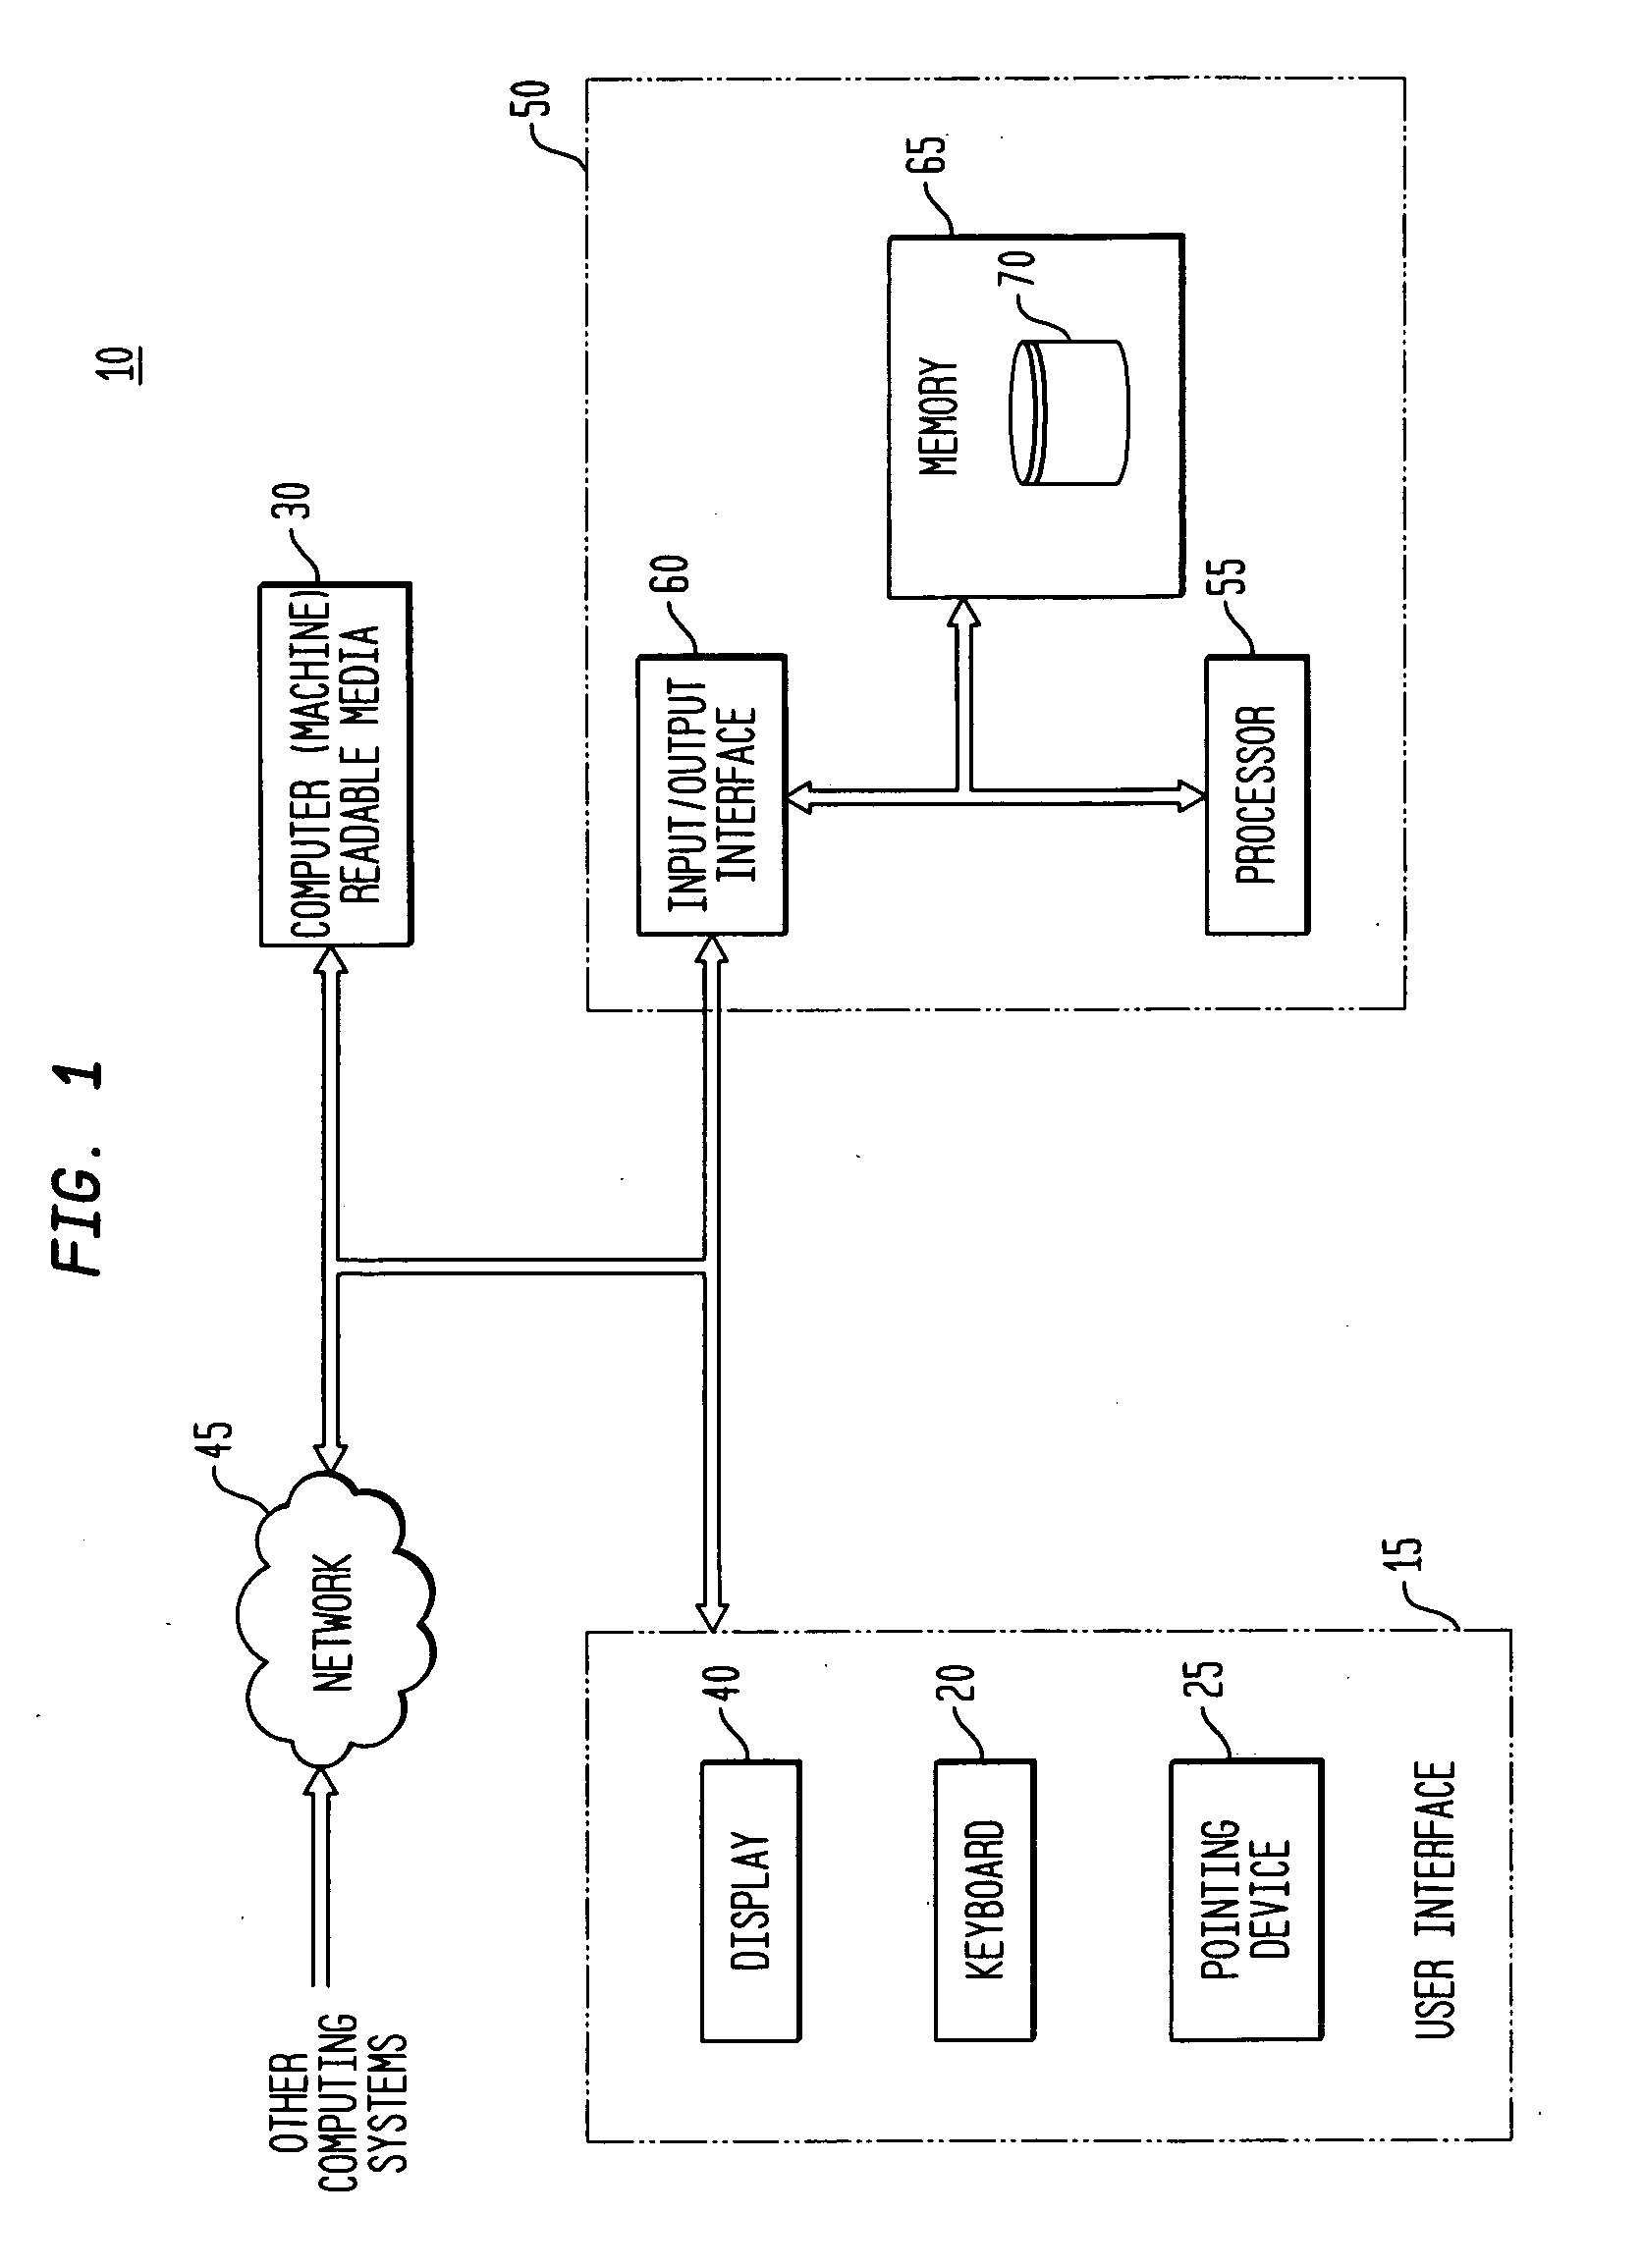 Flow transform for integrated circuit design and simulation having combined data flow, control flow, and memory flow views